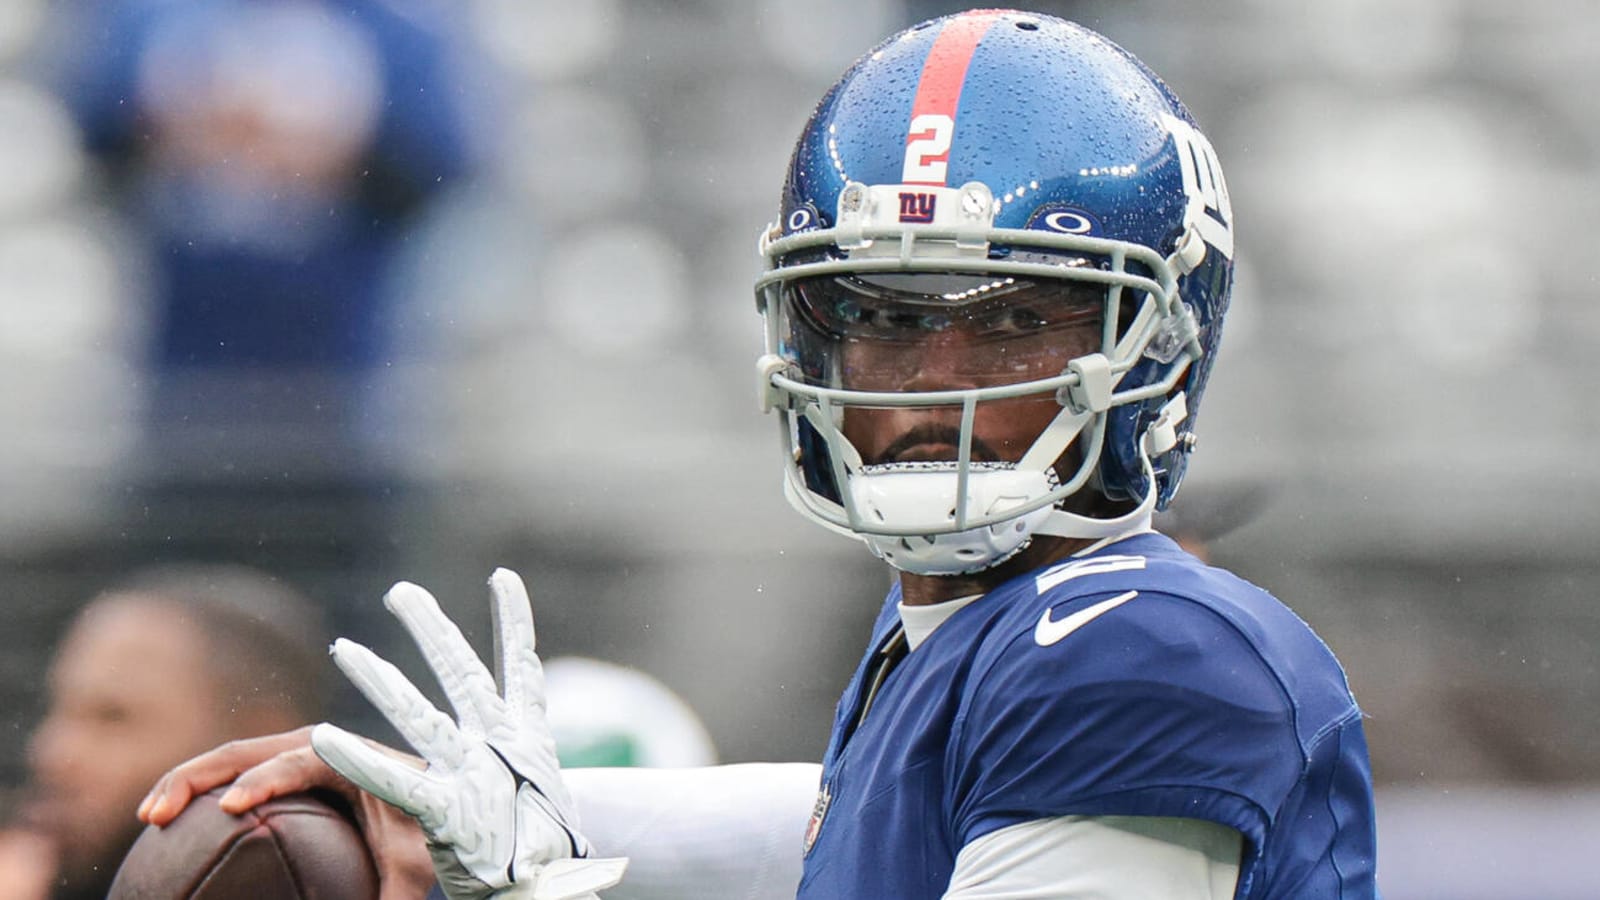 Giants place two notable offensive players on IR